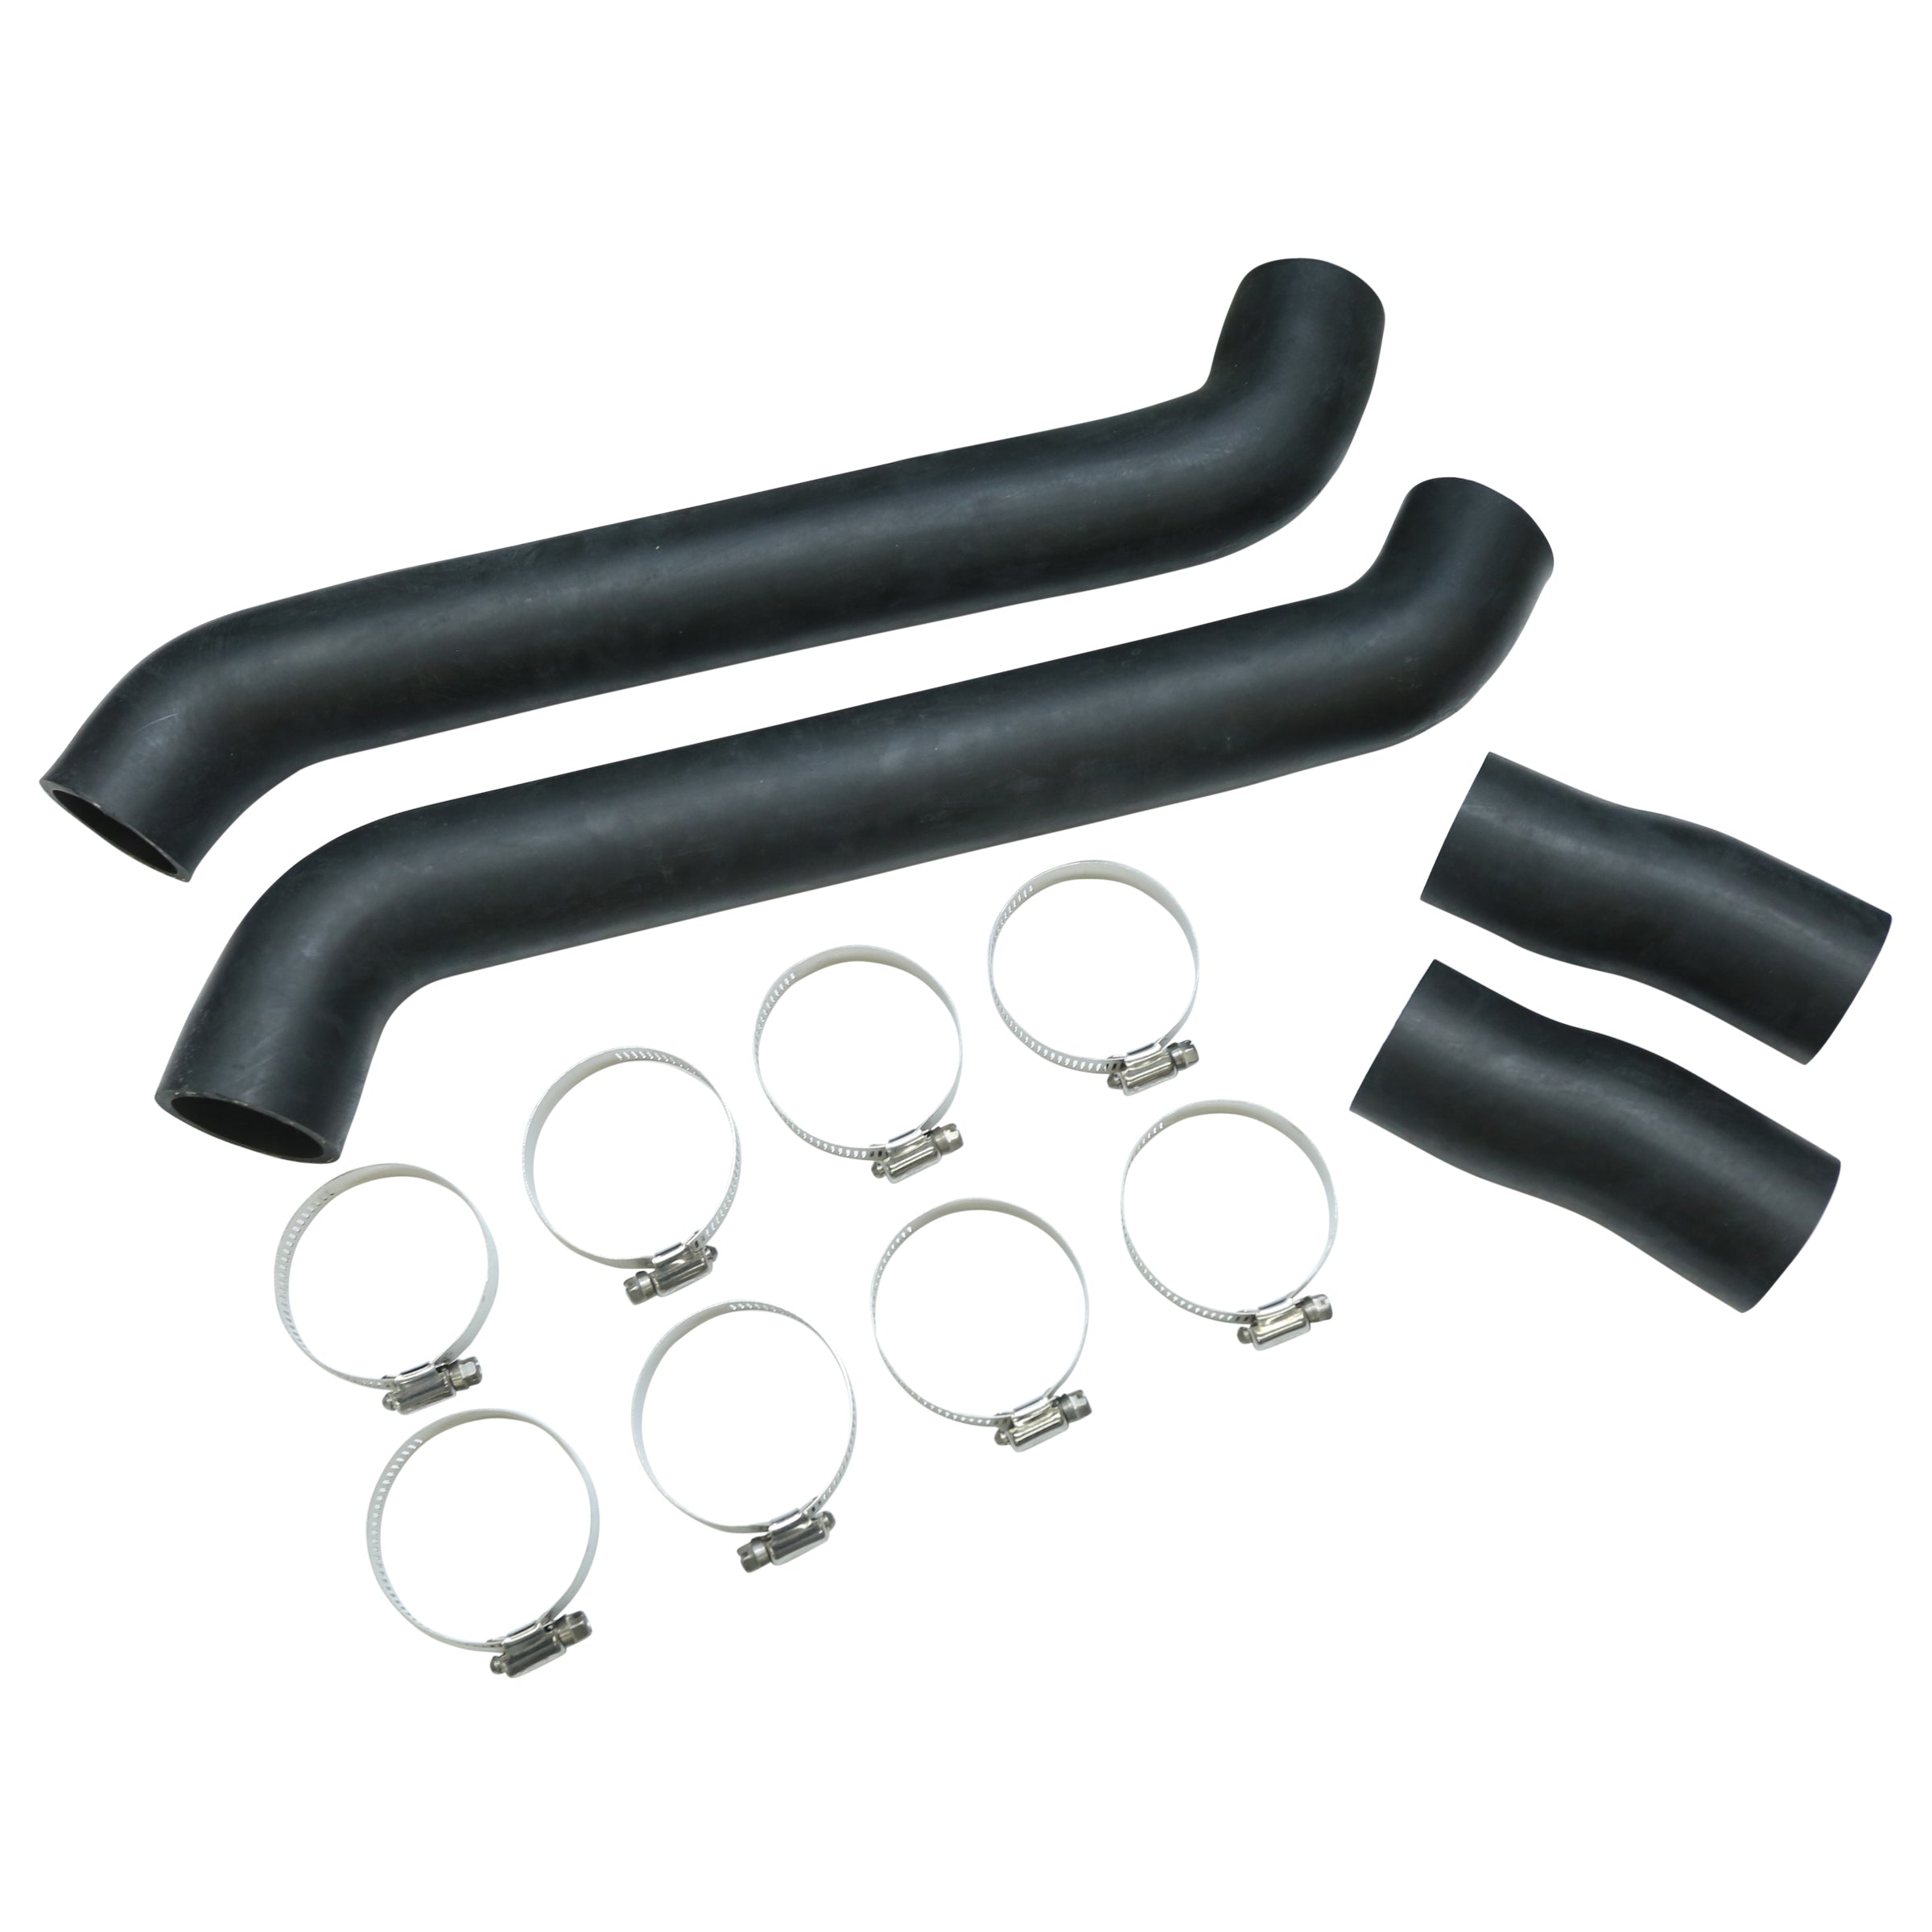 Radiator Hose Kit • 1933-34 Ford V-8 with 1937-48 Ford Flathead (Stock Fan)